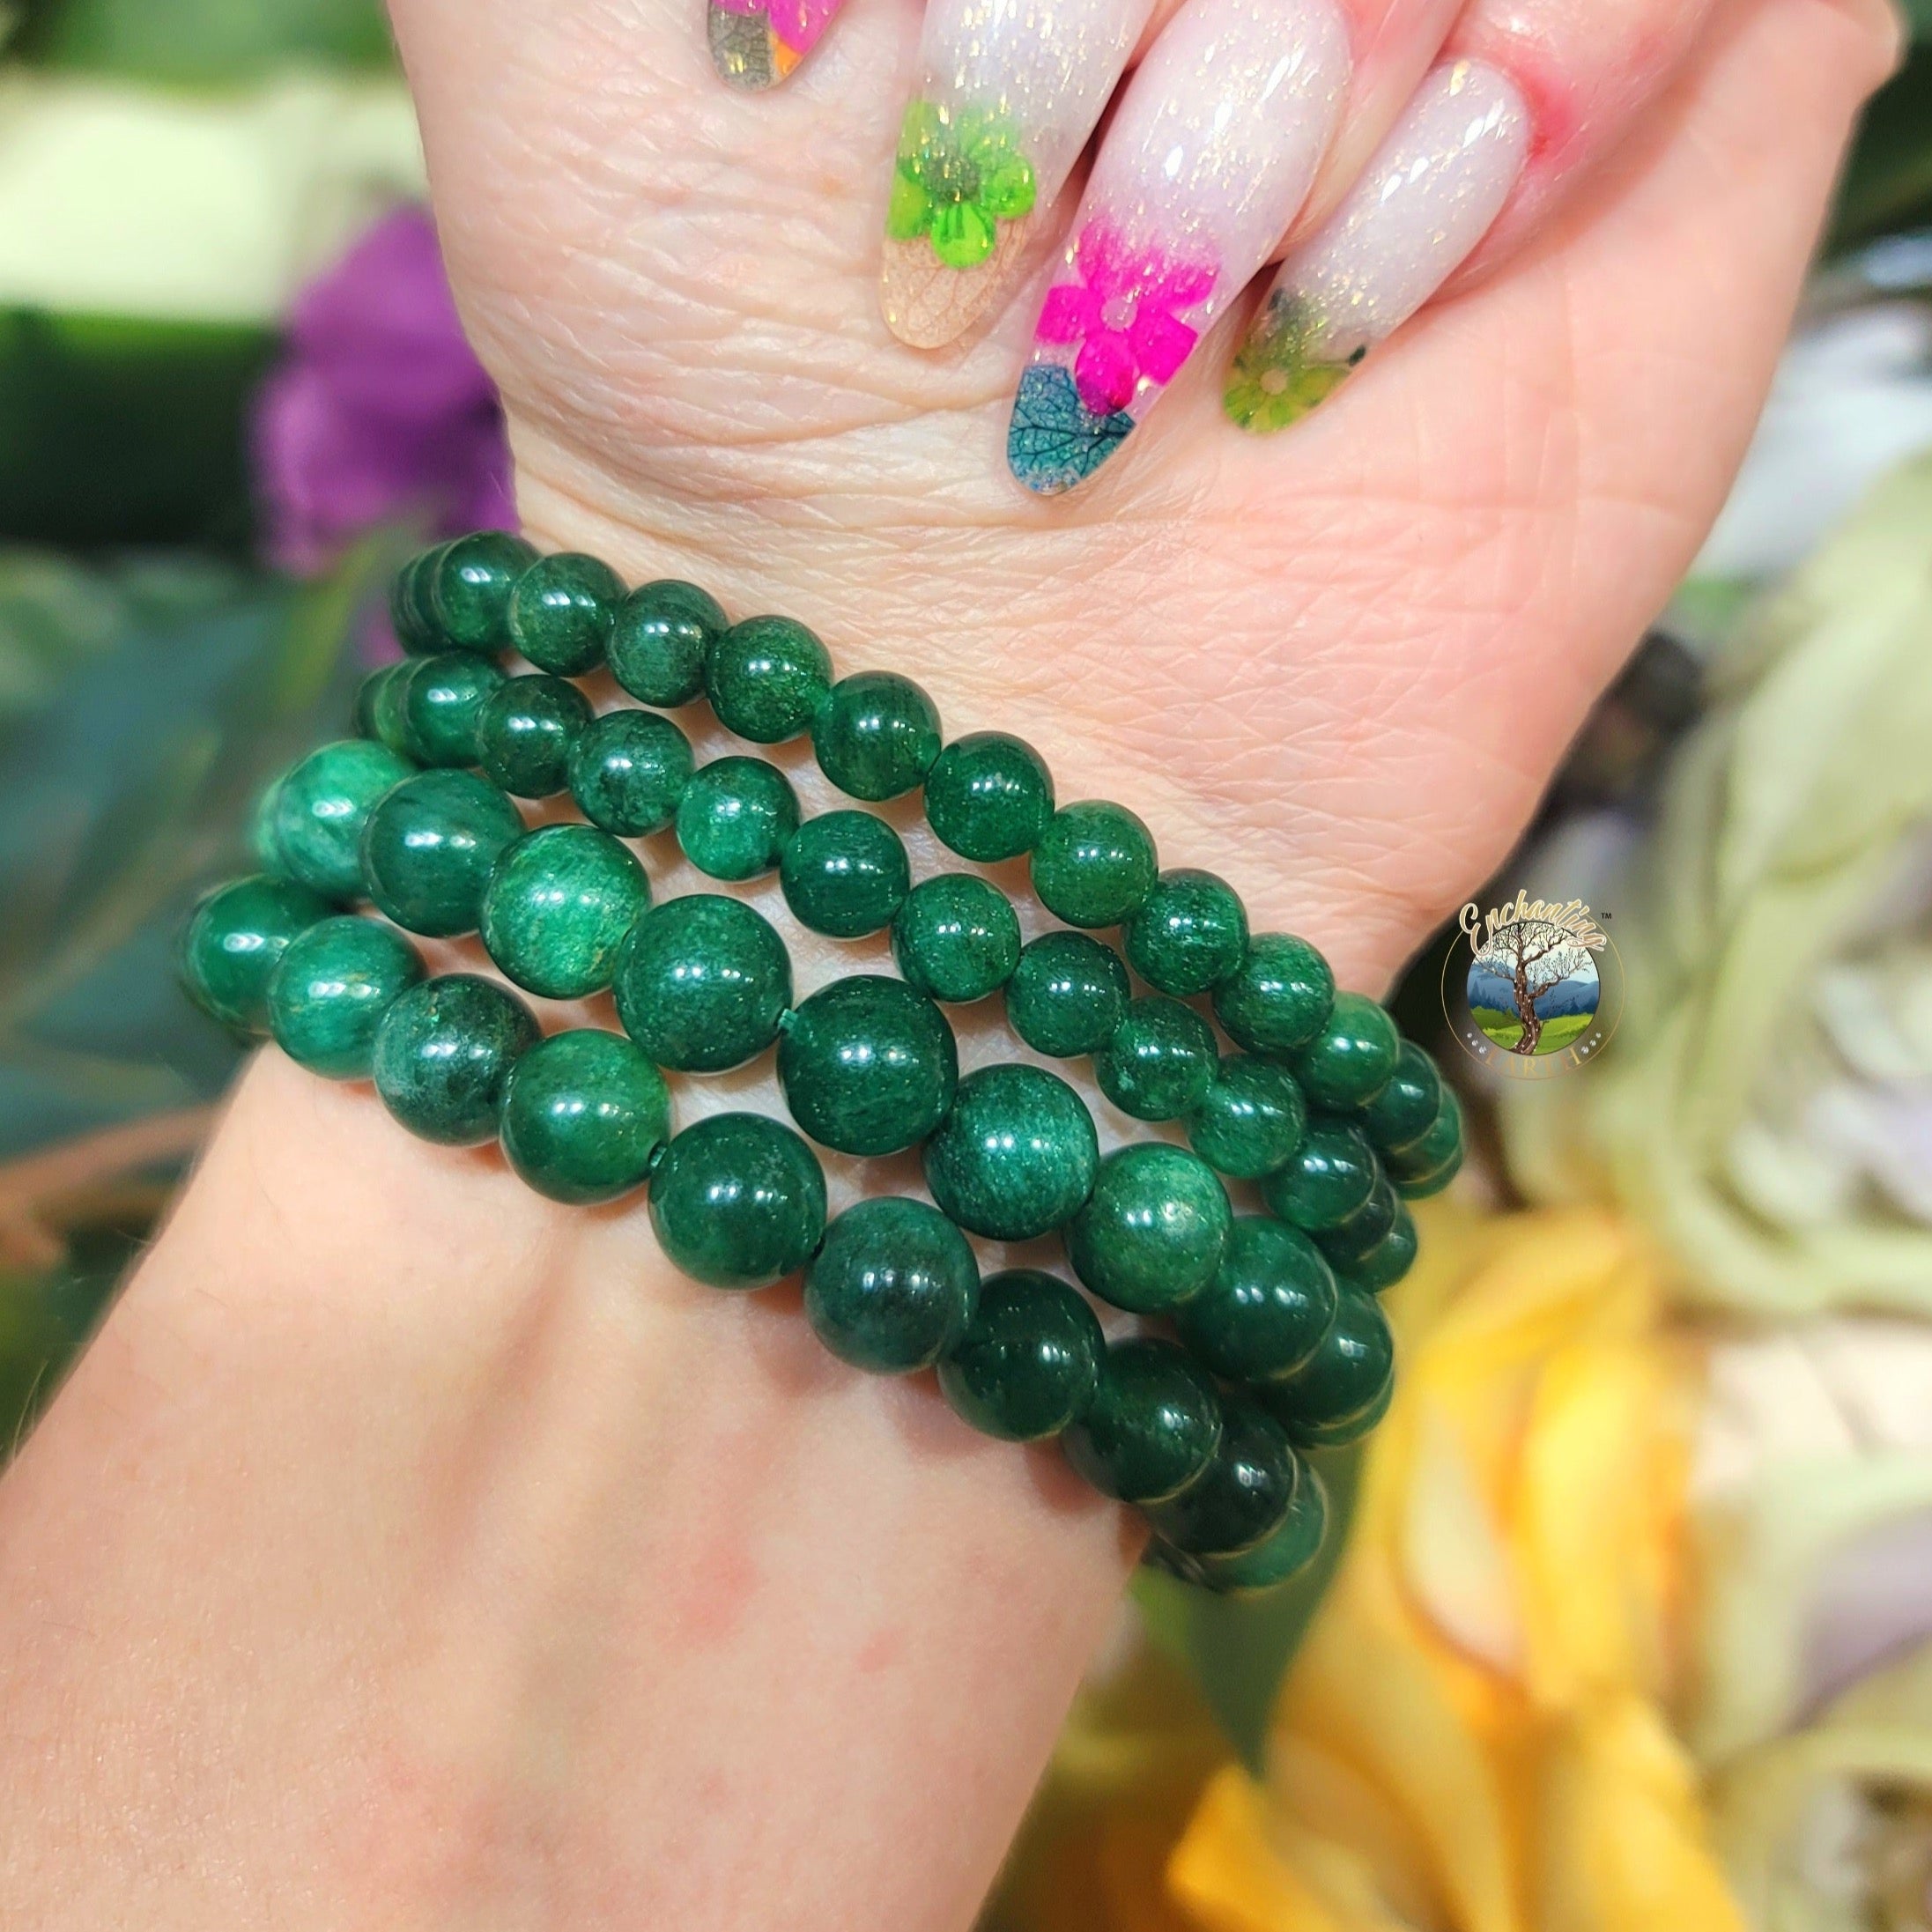 Fuschite Green Mica Bracelet (AAA Grade) for Healing, Inspiration, Intuition and Problem Solving